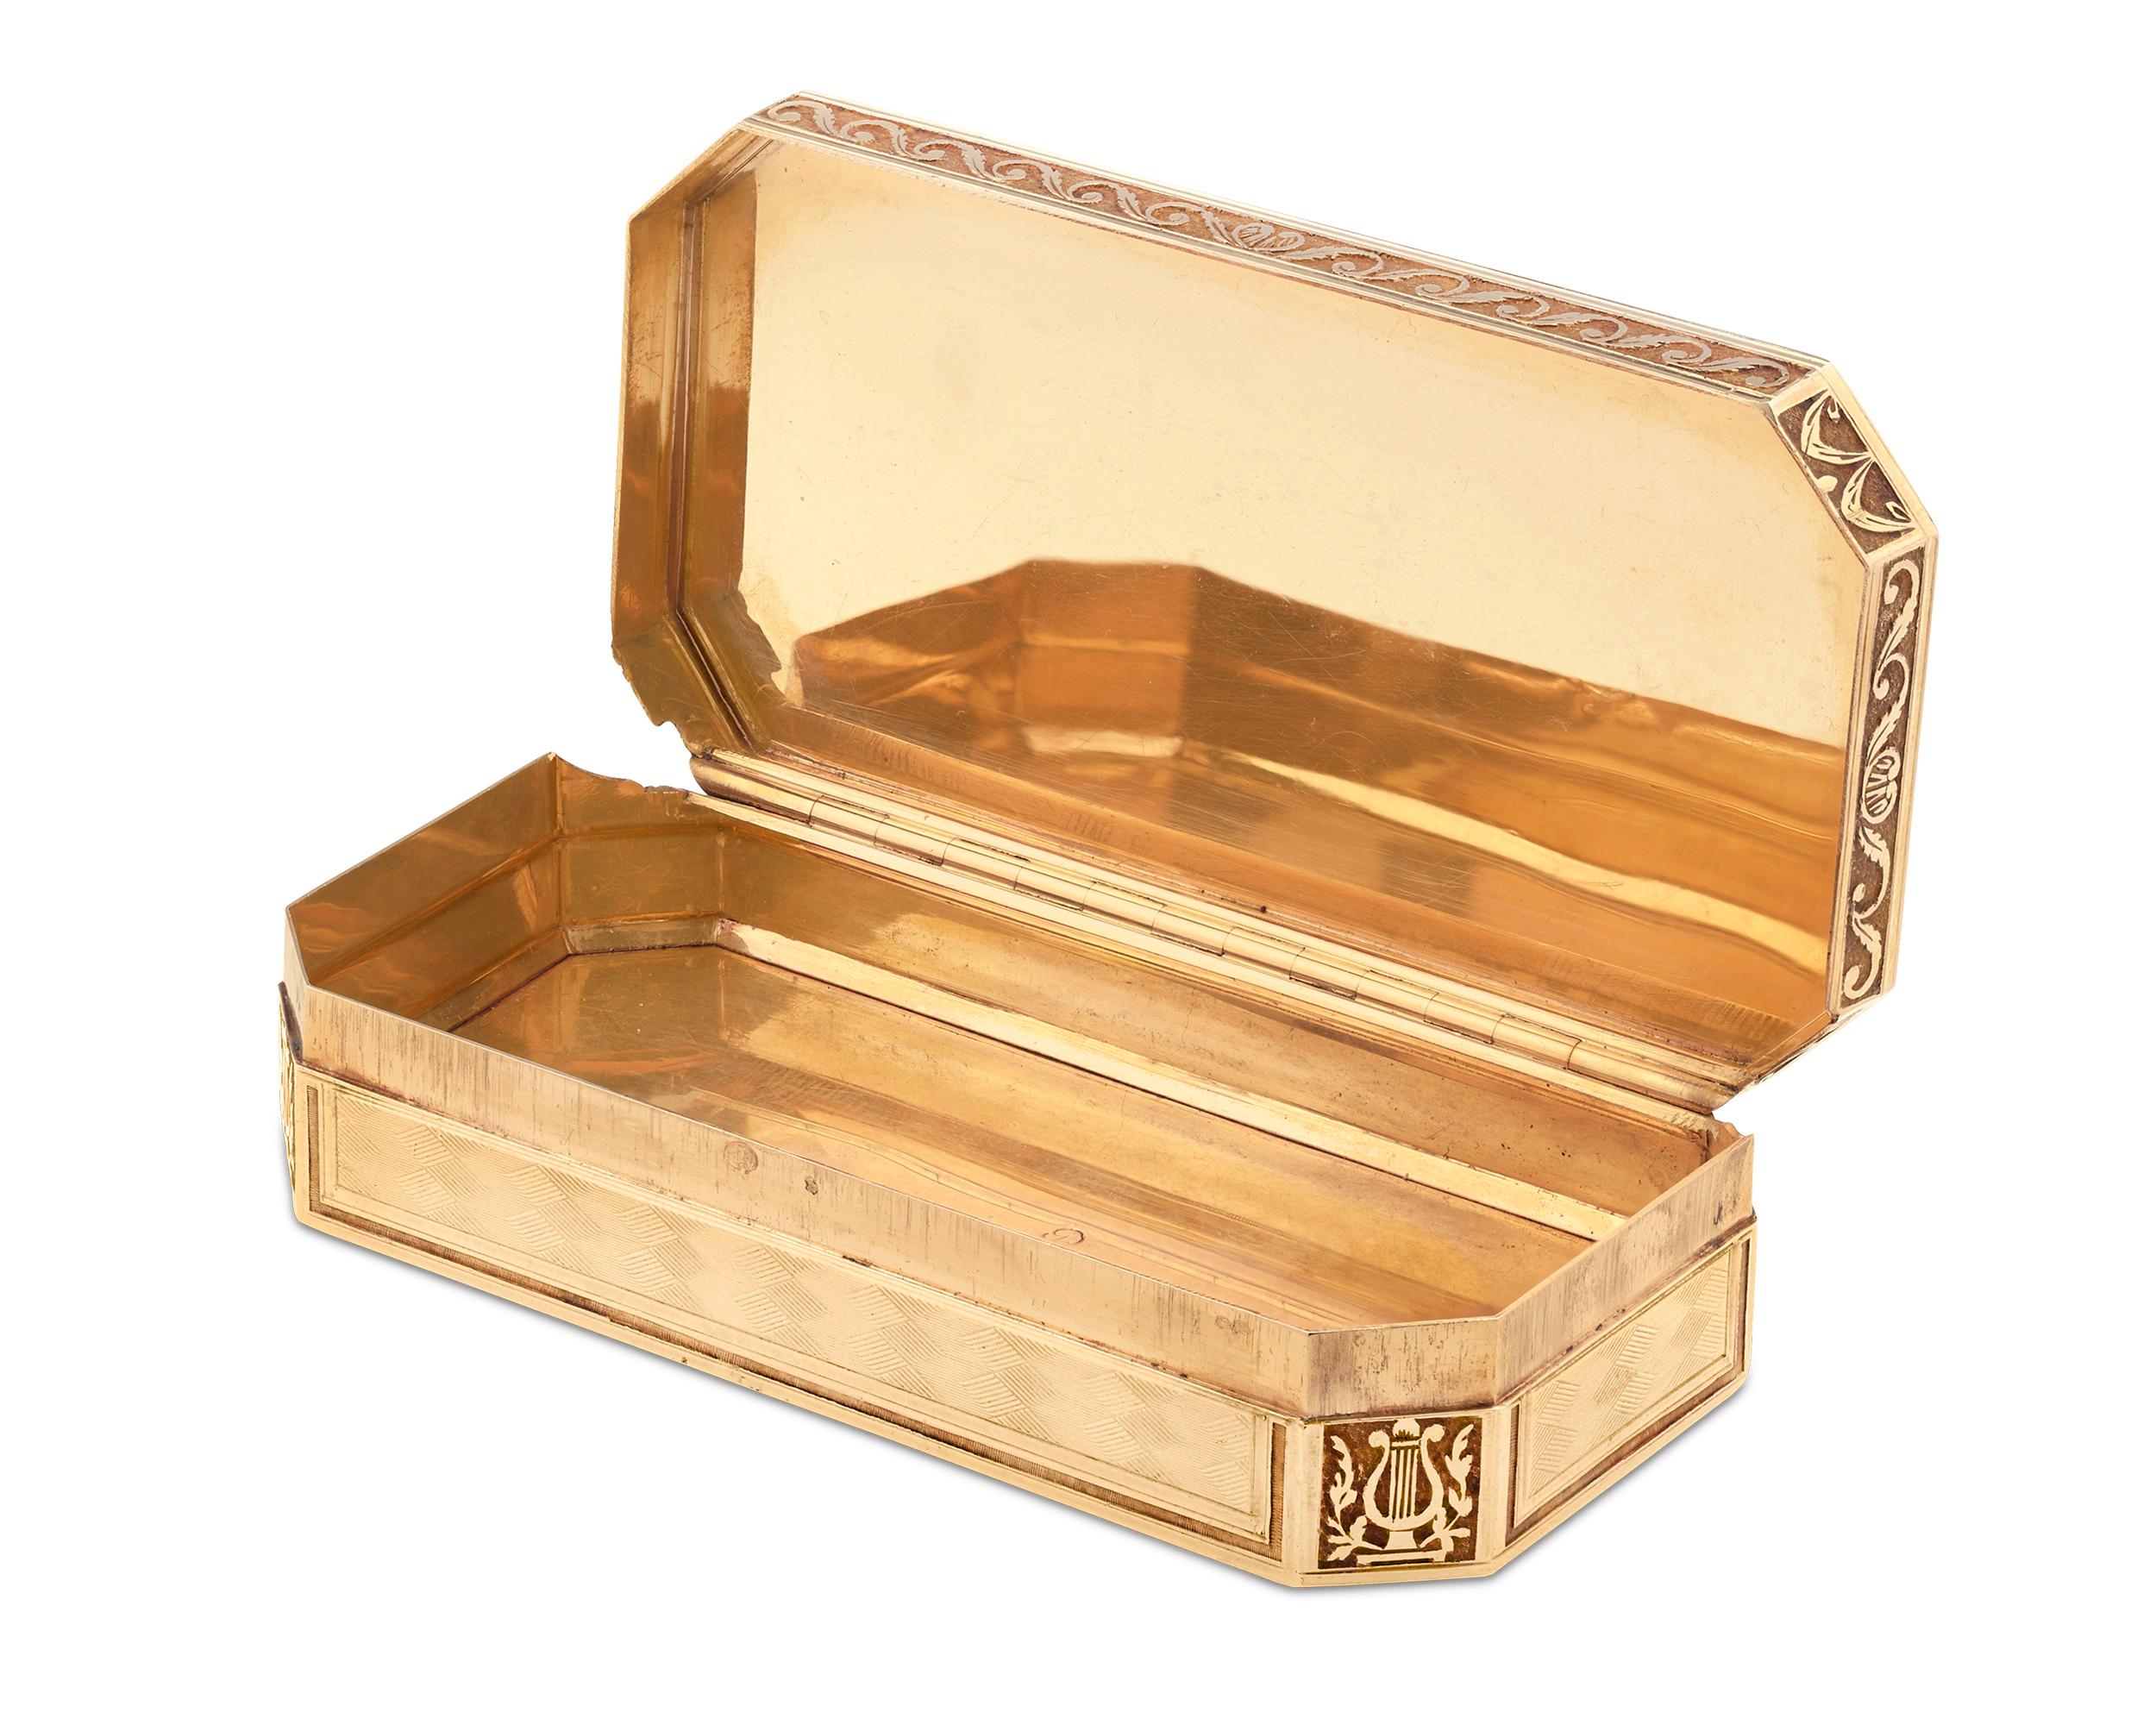 This exceptional multicolored gold snuffbox is a work of impeccable Swiss artistry. Flawless hand-chased and engraved gold elements adorn this rare 19th century box, and dynamic floral swags and musical instruments accompany the finely etched